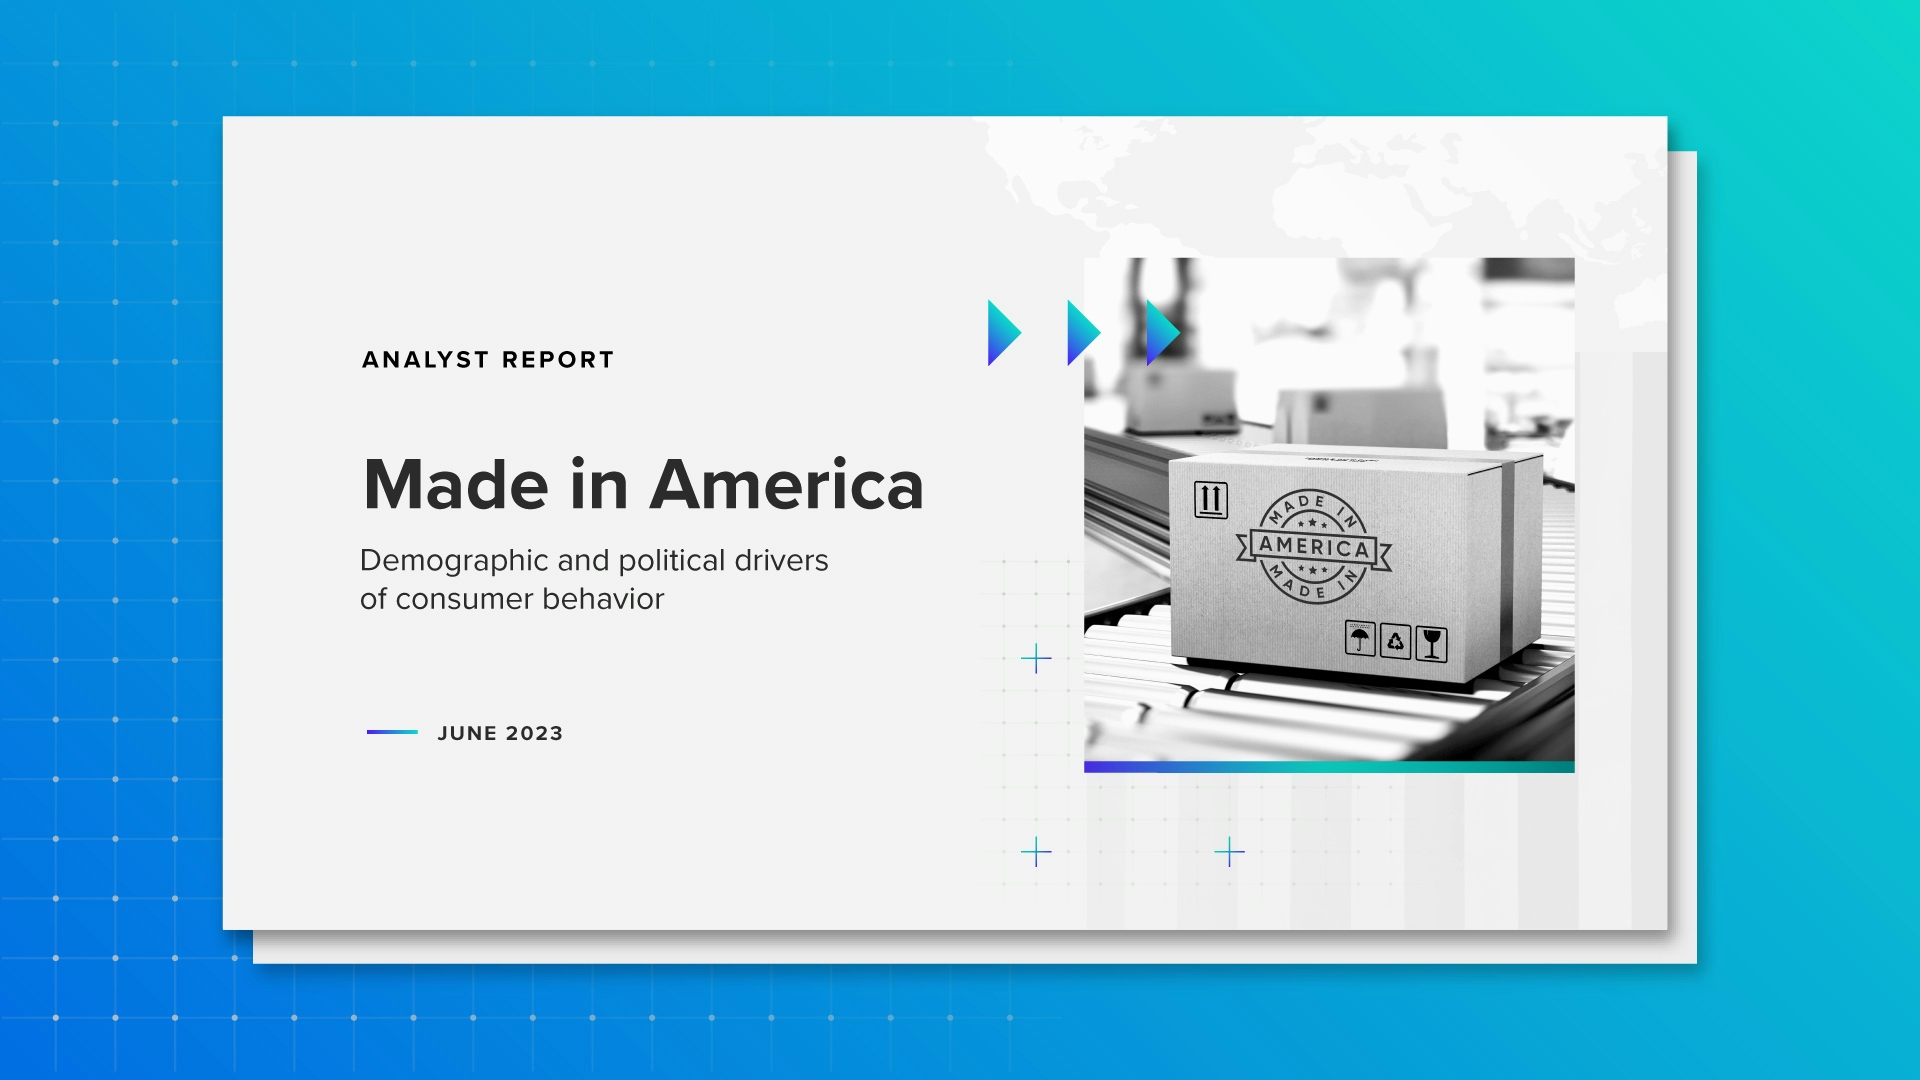 Analyst report. Made in America. Demographic and political drivers of consumer behavior. June 2023.